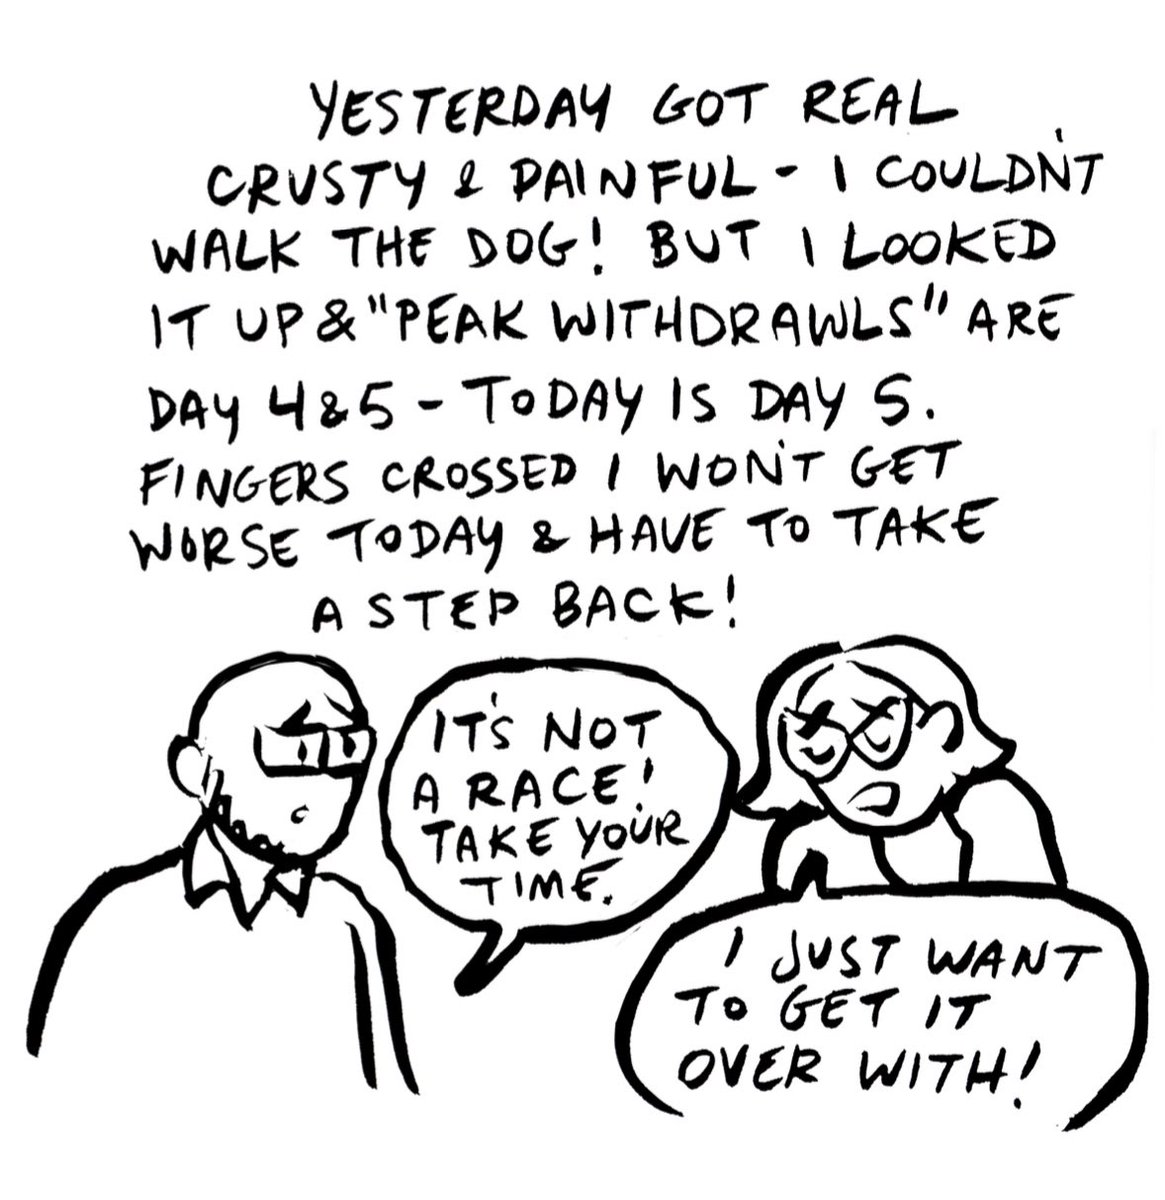 My Paxil Withdrawal Diaries - March 10, 2023. Past me, you’re nowhere near the peak! Quit looking medical stuff up online! #autobiocomic #journalcomic #paxilwithdrawal